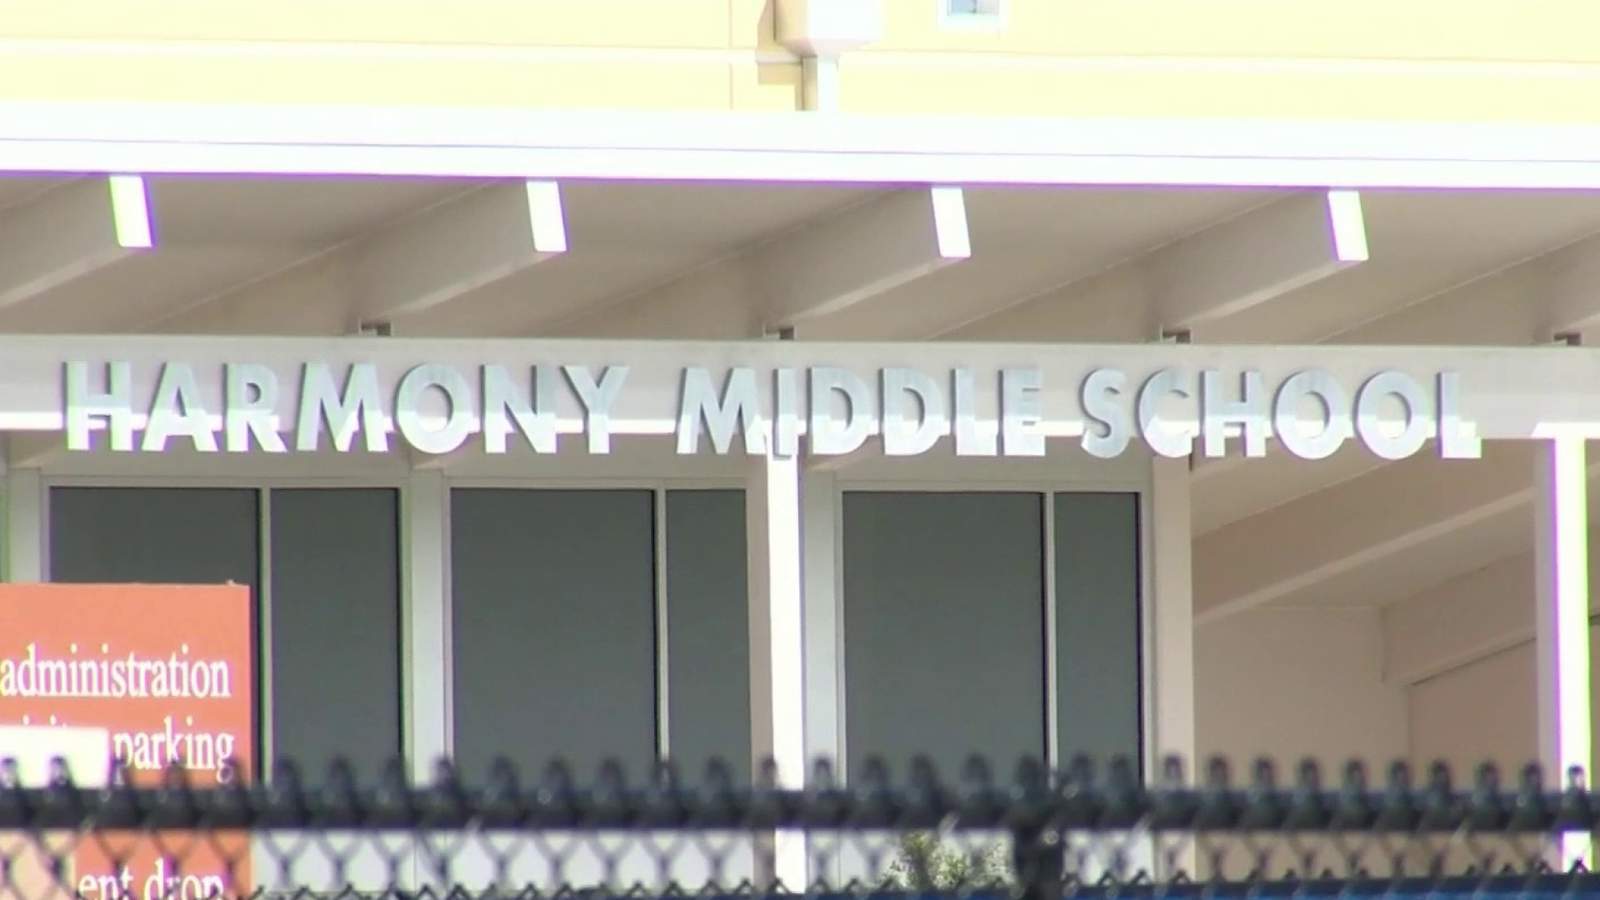 What led to the first school shut down in Florida